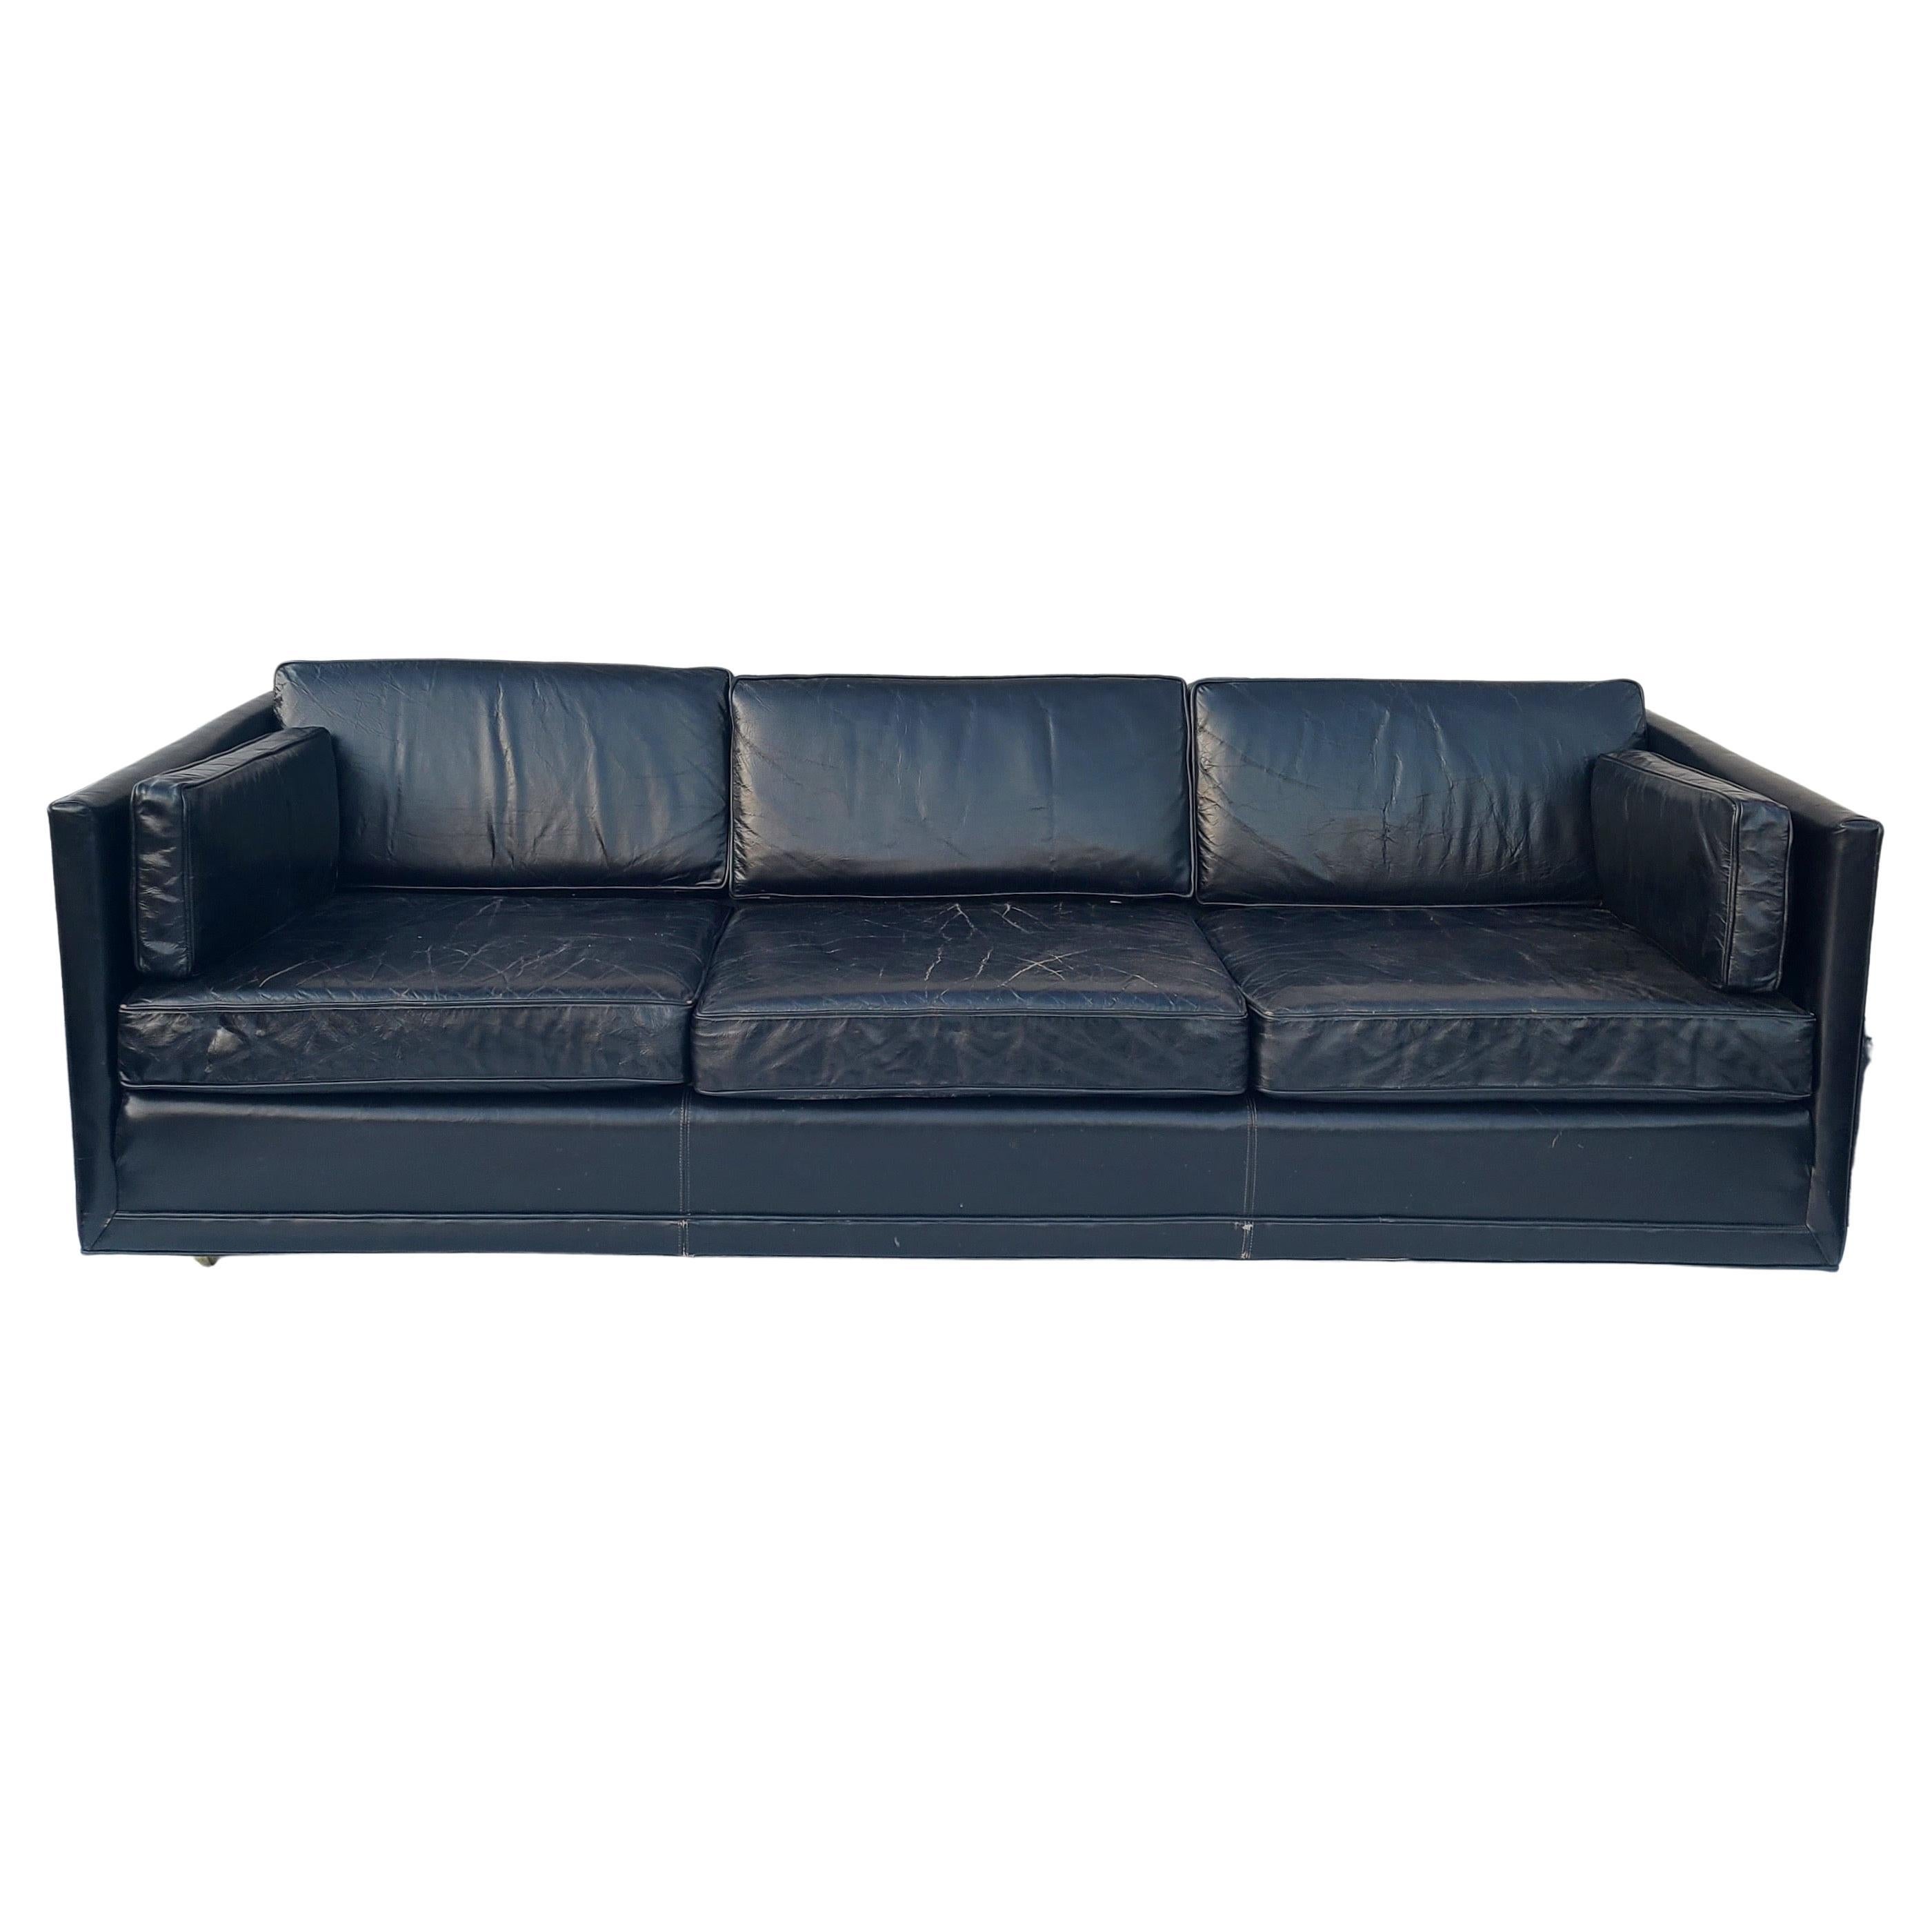 Please message us for a cost effective shipping quote to your location.

Mid Century Modern Black Leather Tuxedo Sofa by Charles Pfister for Knoll.
Double Stitched through the backrest.
Cushion foam has been replaced.
Leather seat surfaces show